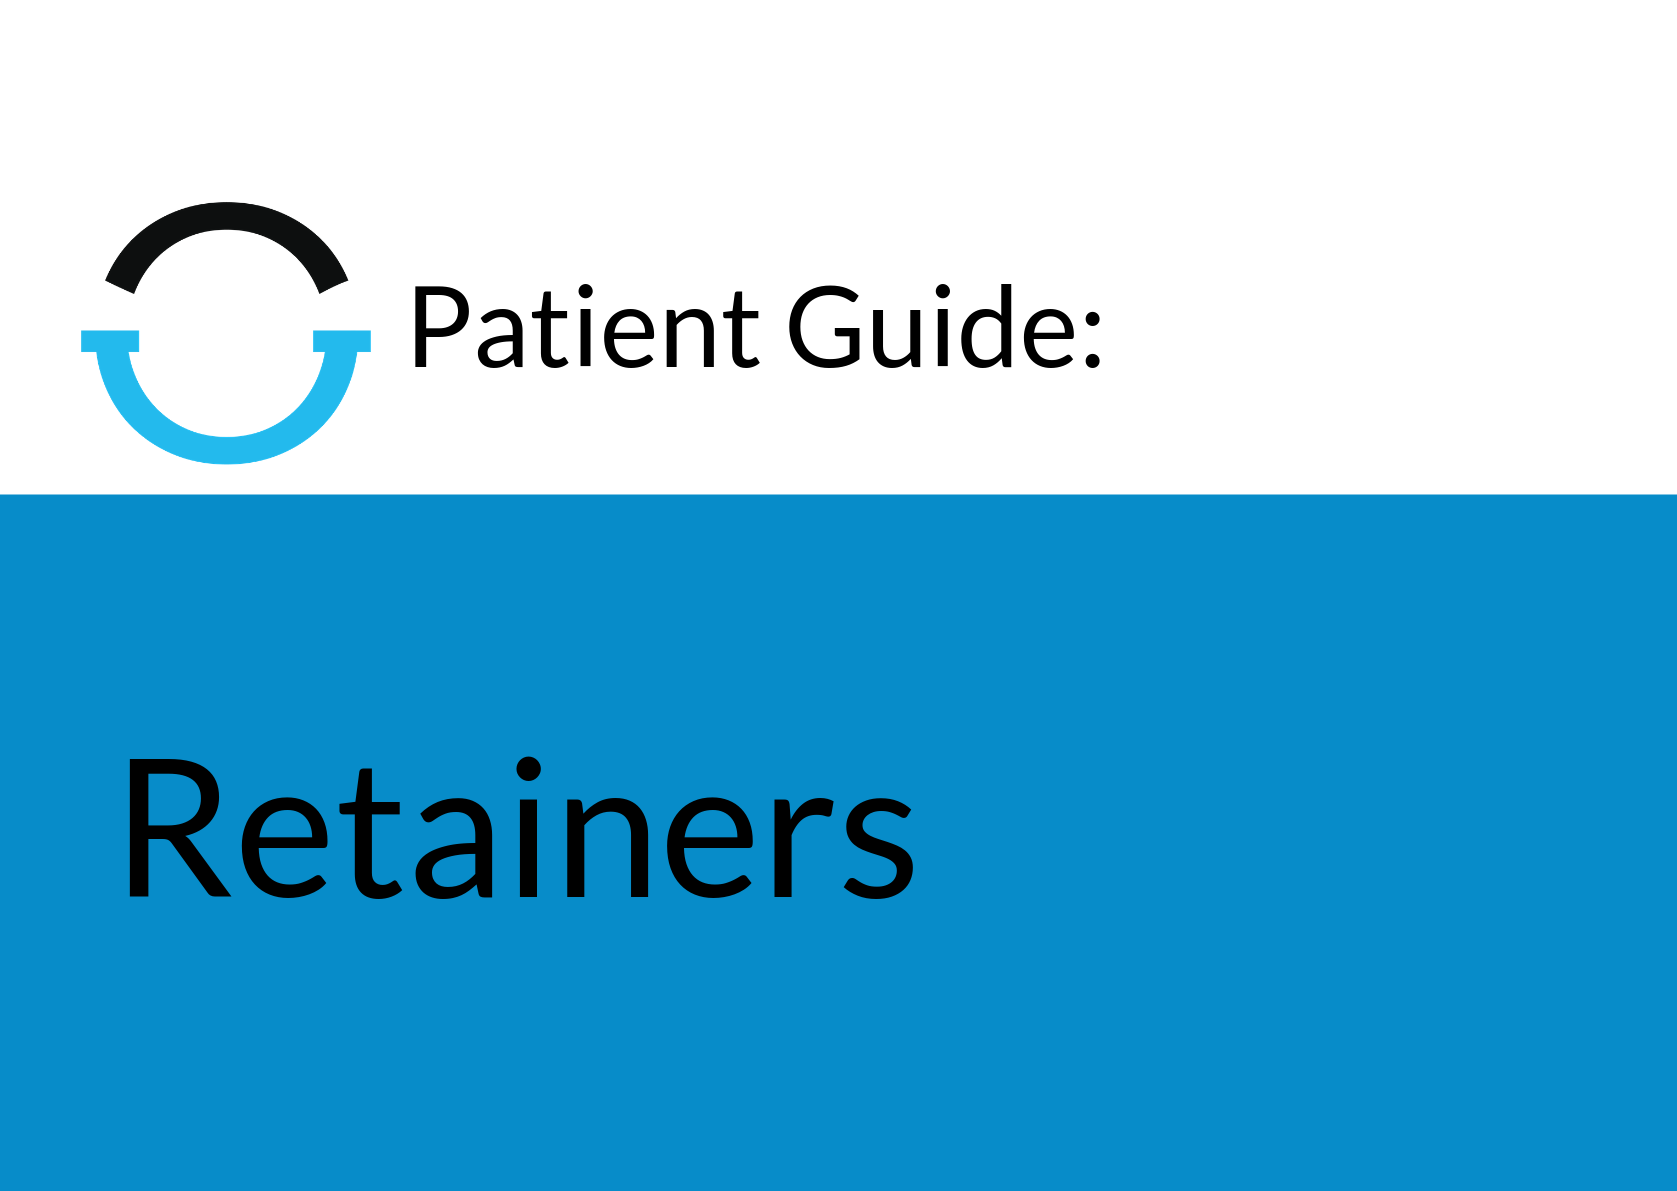 Patient Guide Header Image – Retainers LARGE